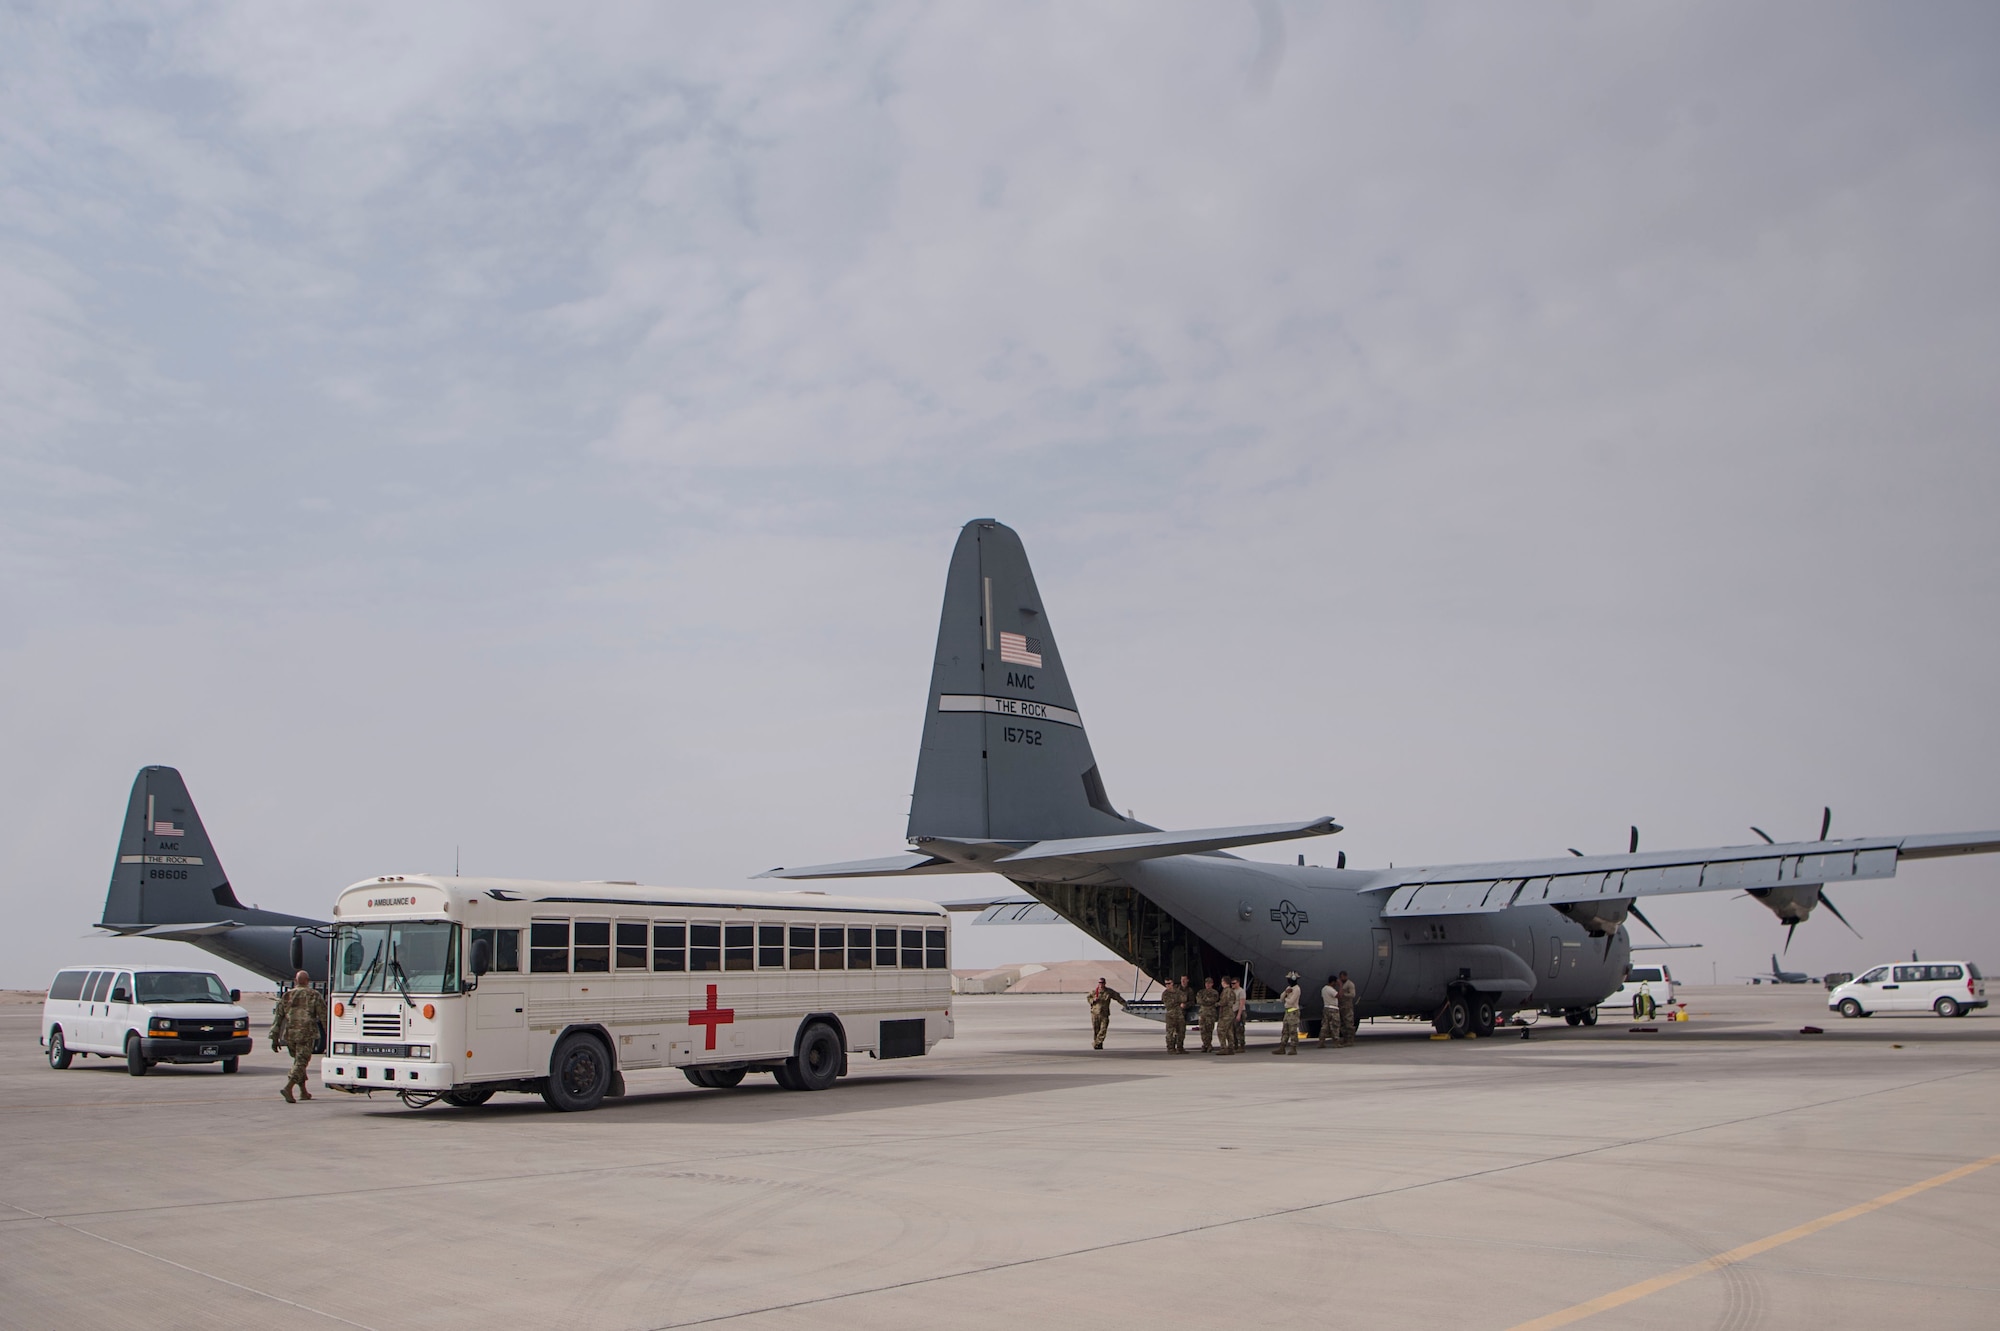 Airmen of the 379th Expeditionary Medical Support Squadron (EMDSS) En Route Patient Staging (ERPS) Facility, finish loading in-transit patients and their luggage onto a bus Feb. 27, 2019, at Al Udeid Air Base, Qatar. Airmen at the 379th EMDSS’s ERPS facility work at both the clinic and on the flightline to ensure safe transport and care is provided to in-transit patients during their stay at Al Udeid before they are moved to locations supporting higher levels of medical treatment, if necessary. (U.S. Air Force photo by Tech. Sgt. Christopher Hubenthal)